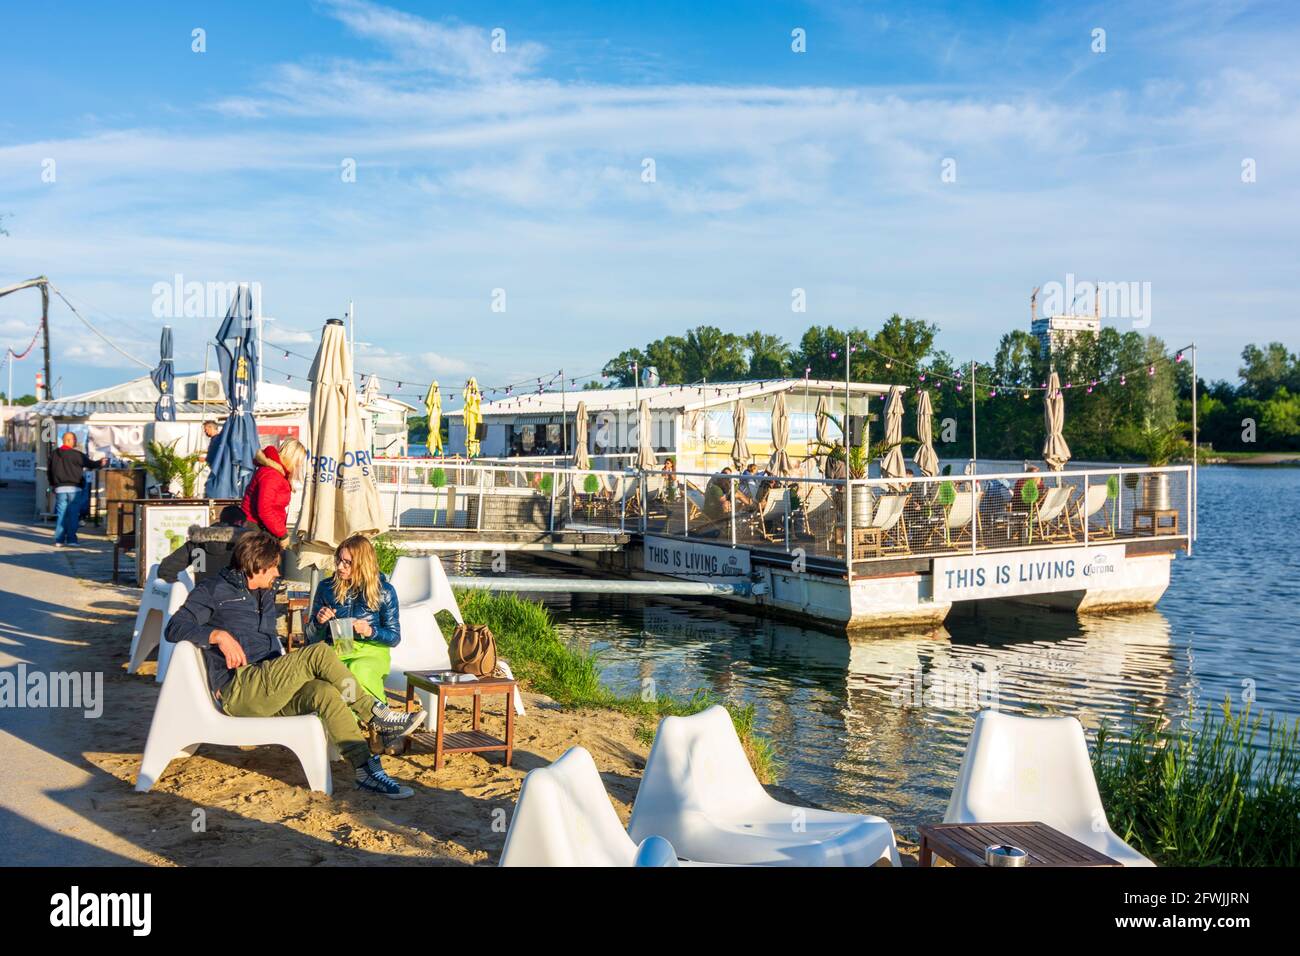 Wien, Vienna: restaurant reopened after closure due to Covid-19, 'This is Living' Corona beer billboard, floating restaurant 'Vienna City Beach Club' Stock Photo